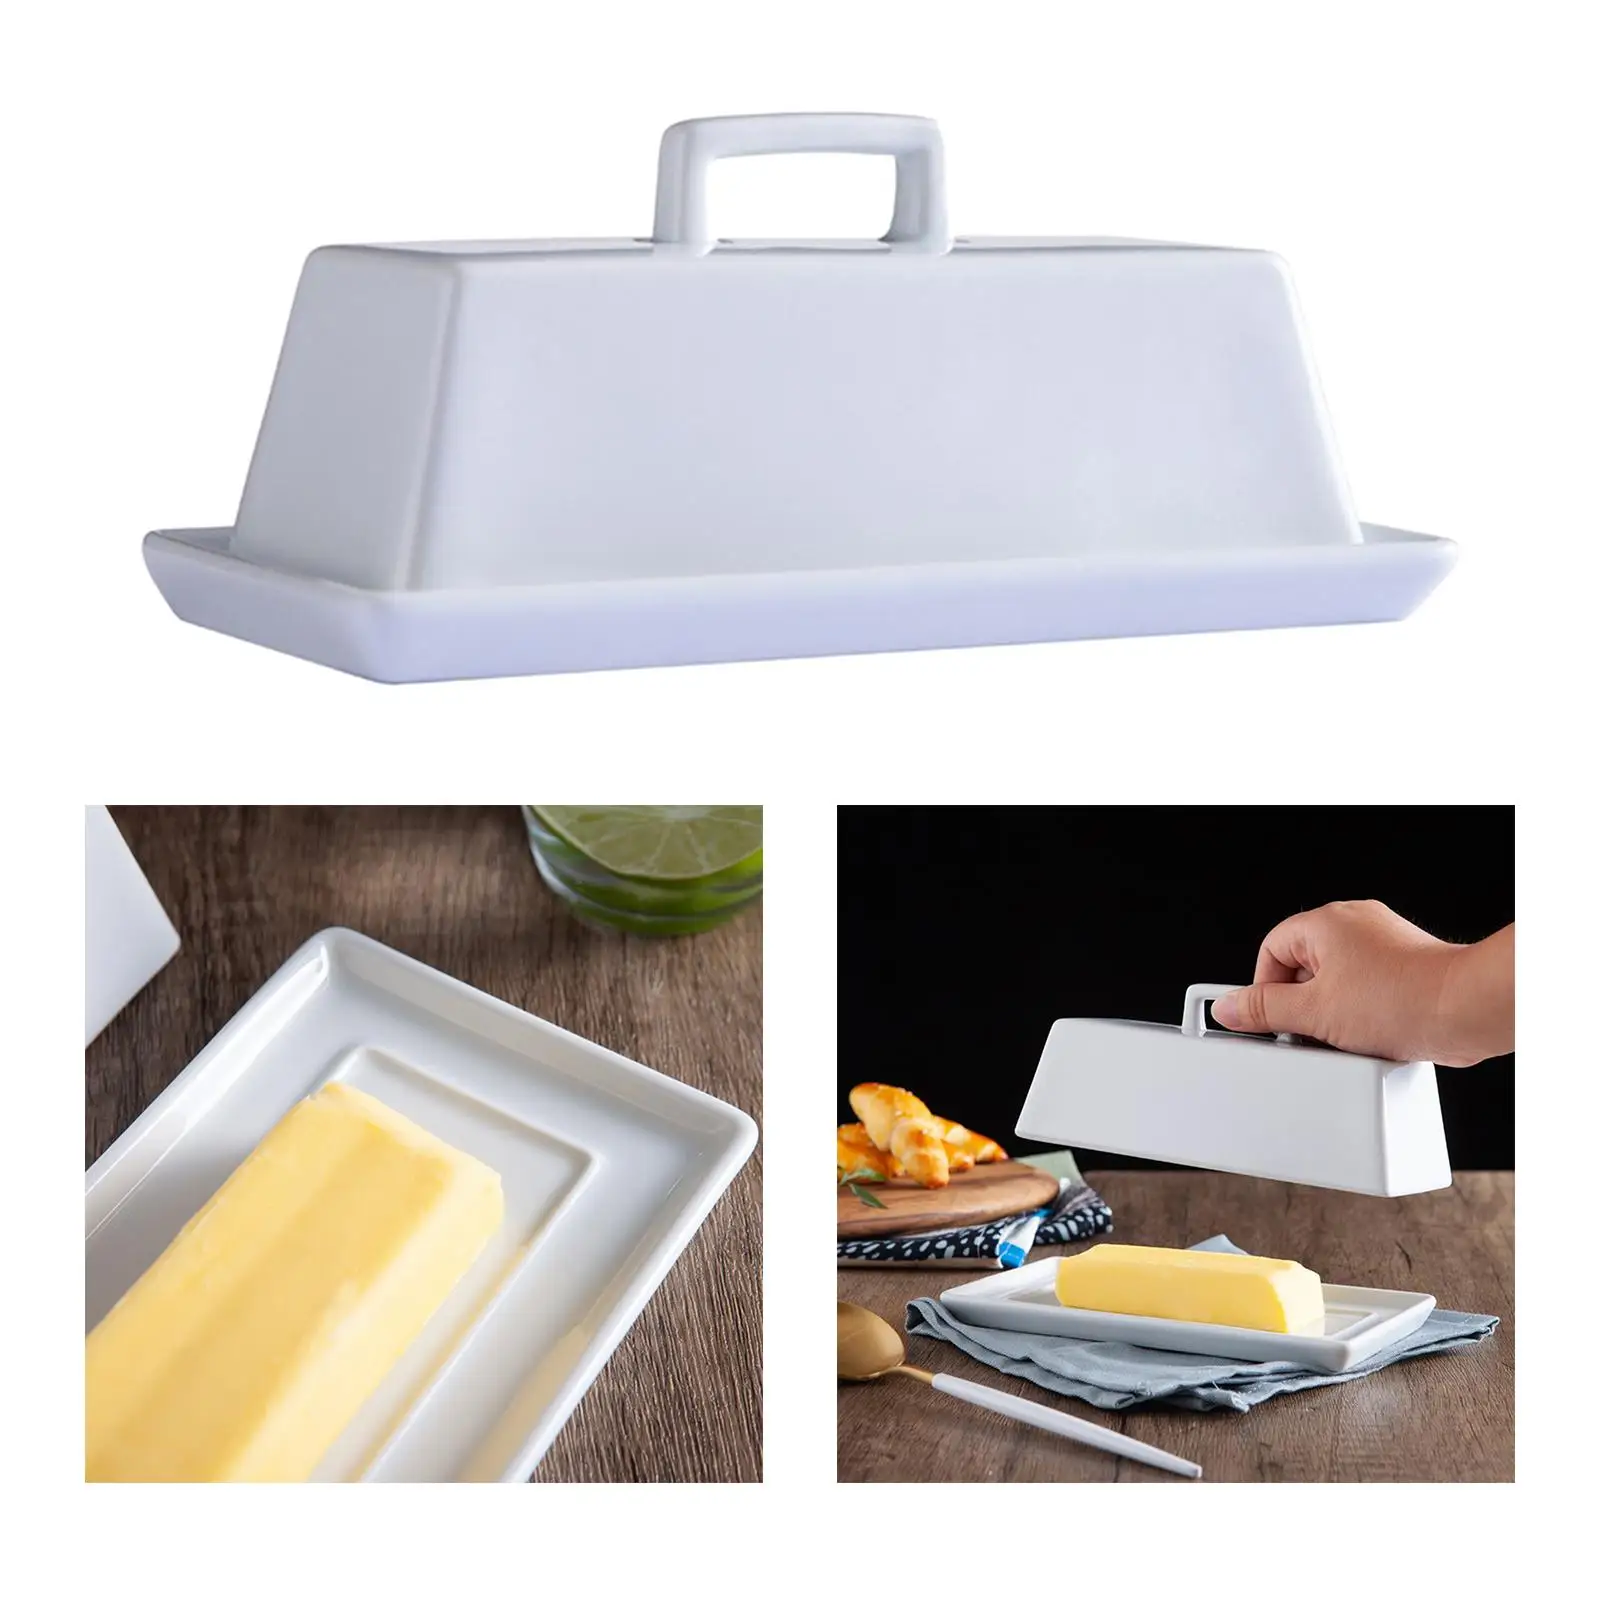 Ceramic Set Serving Tray Porcelain White with Handle Dinnerware Covered Butter Dish for Countertop Microwave Refrigerator Party